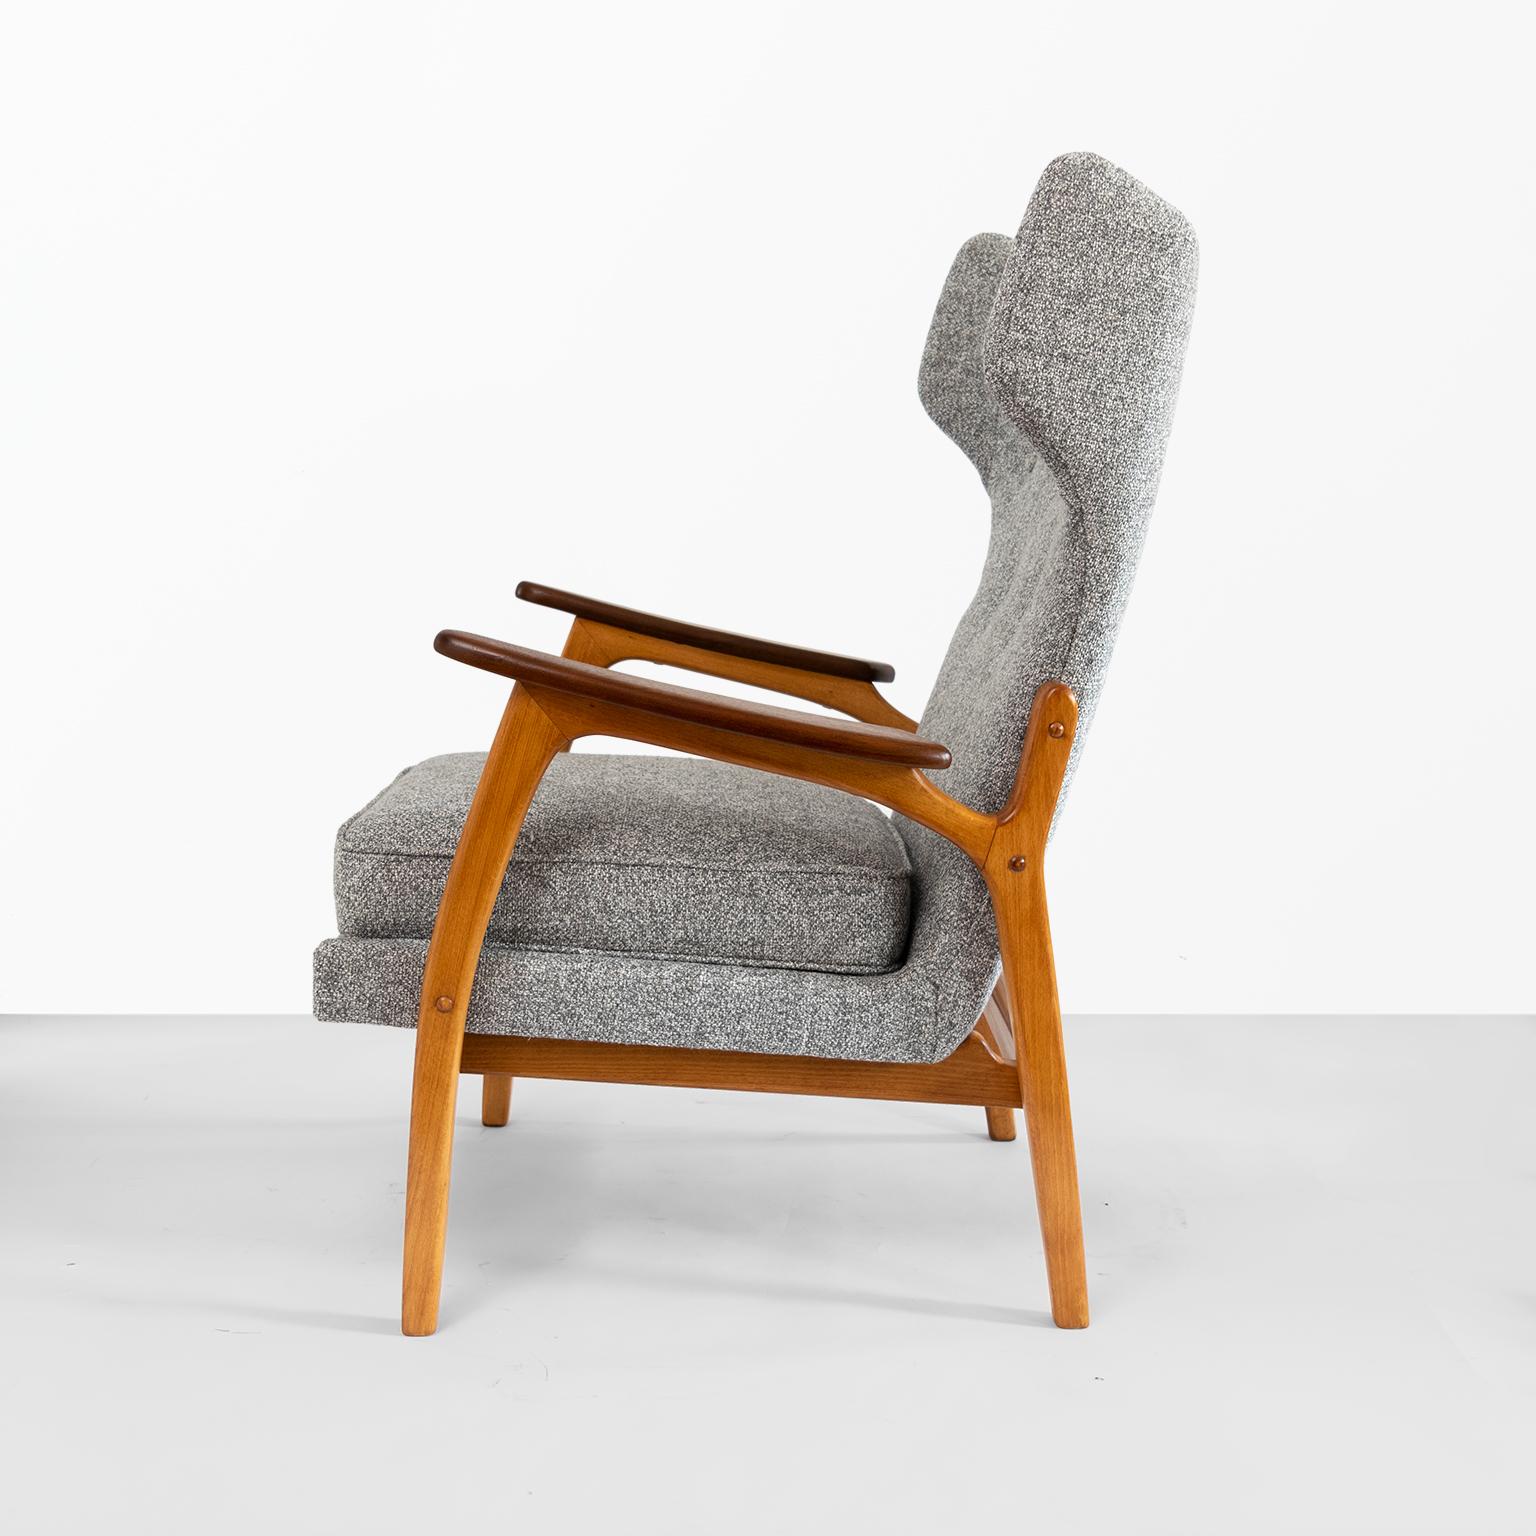 Polished Scandinavian Modern Wingback Chair with a Solid Beech Wood Frame and Teak Arms